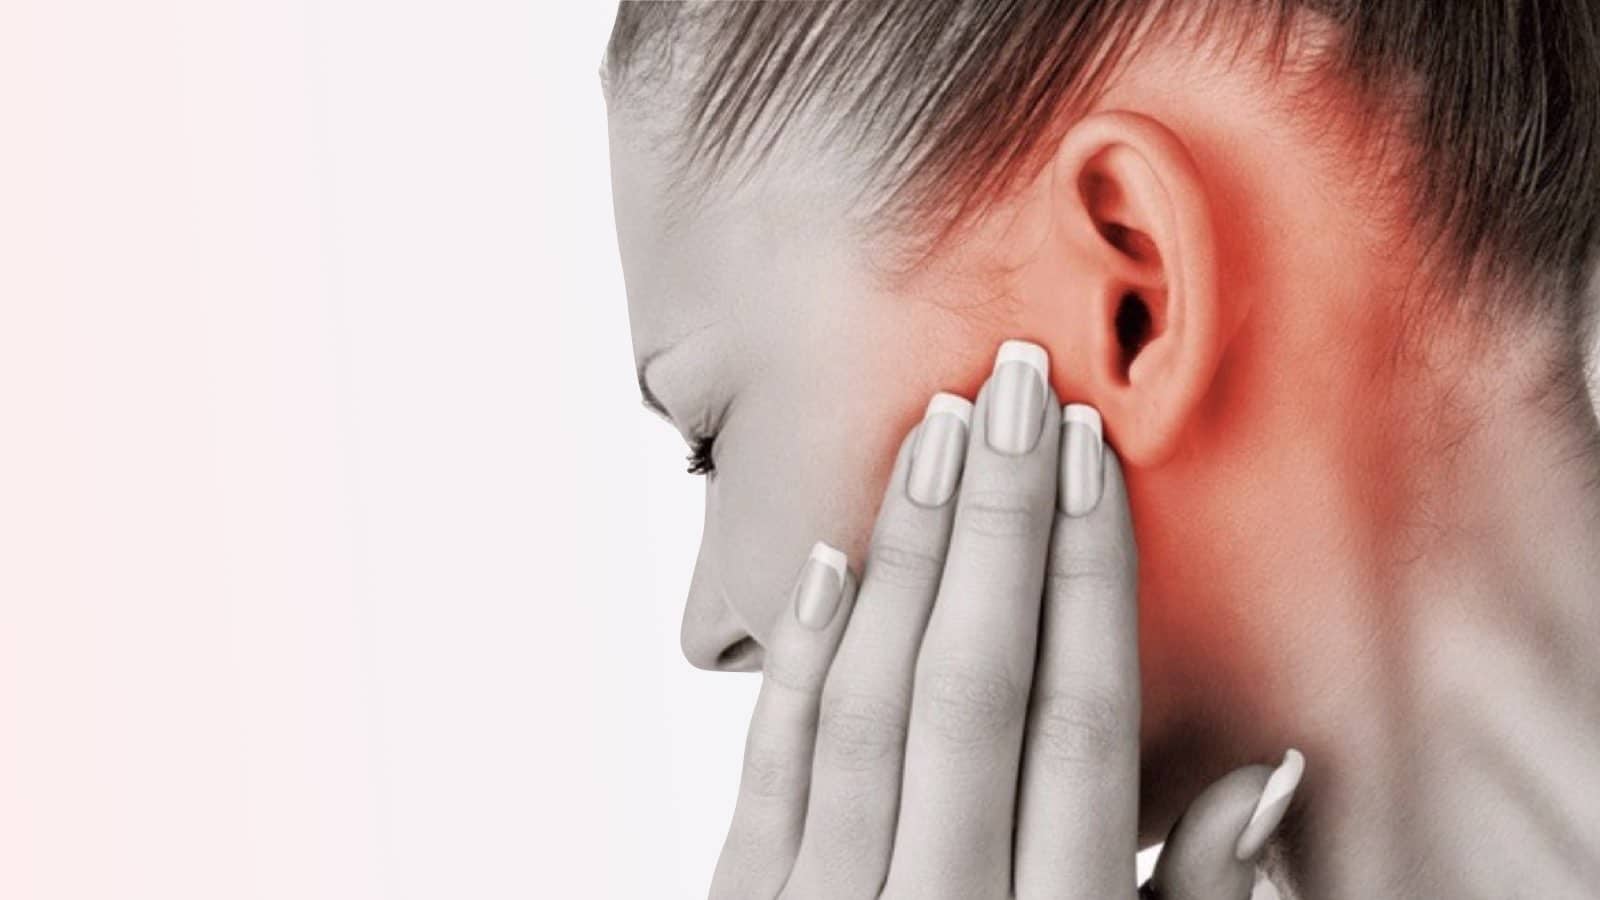 Signs of Middle Ear Infection (Otitis Media) Most People Ignore